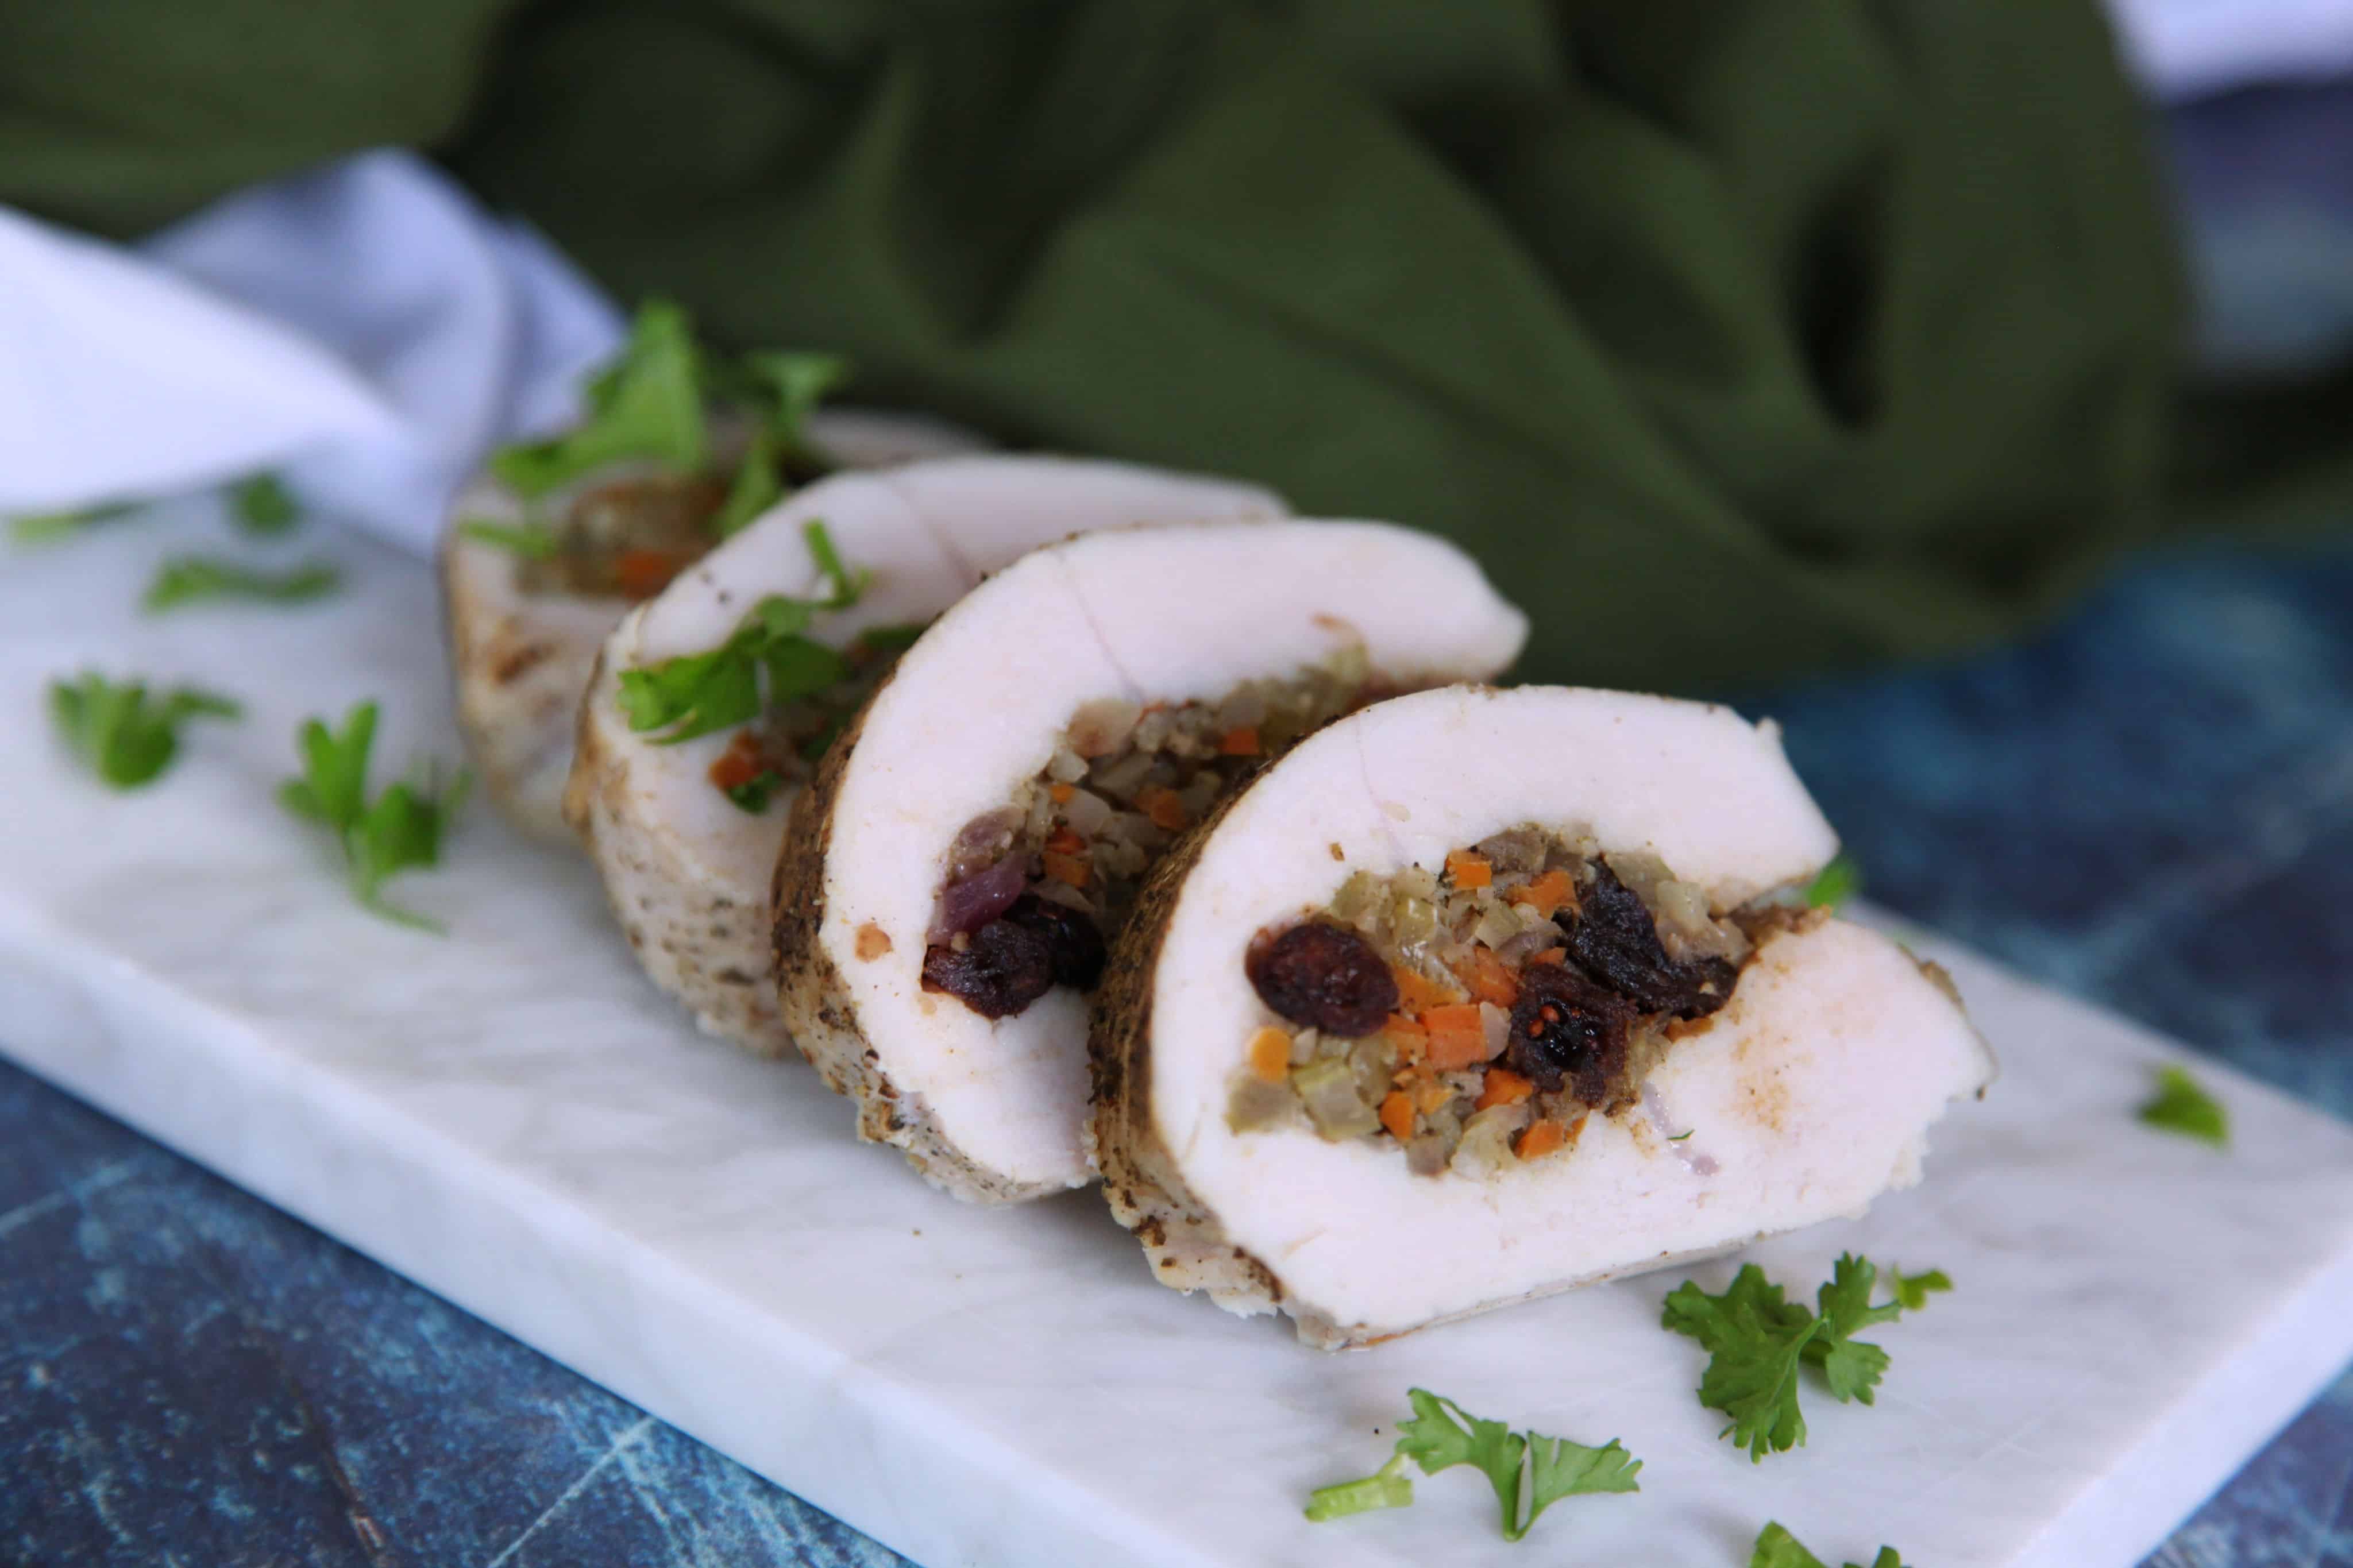 This stuffed turkey tenderloin is a perfect hearty holiday dish that will please all types of eaters. #whole30 #paleo #keto #thanksgiving #lowcarb